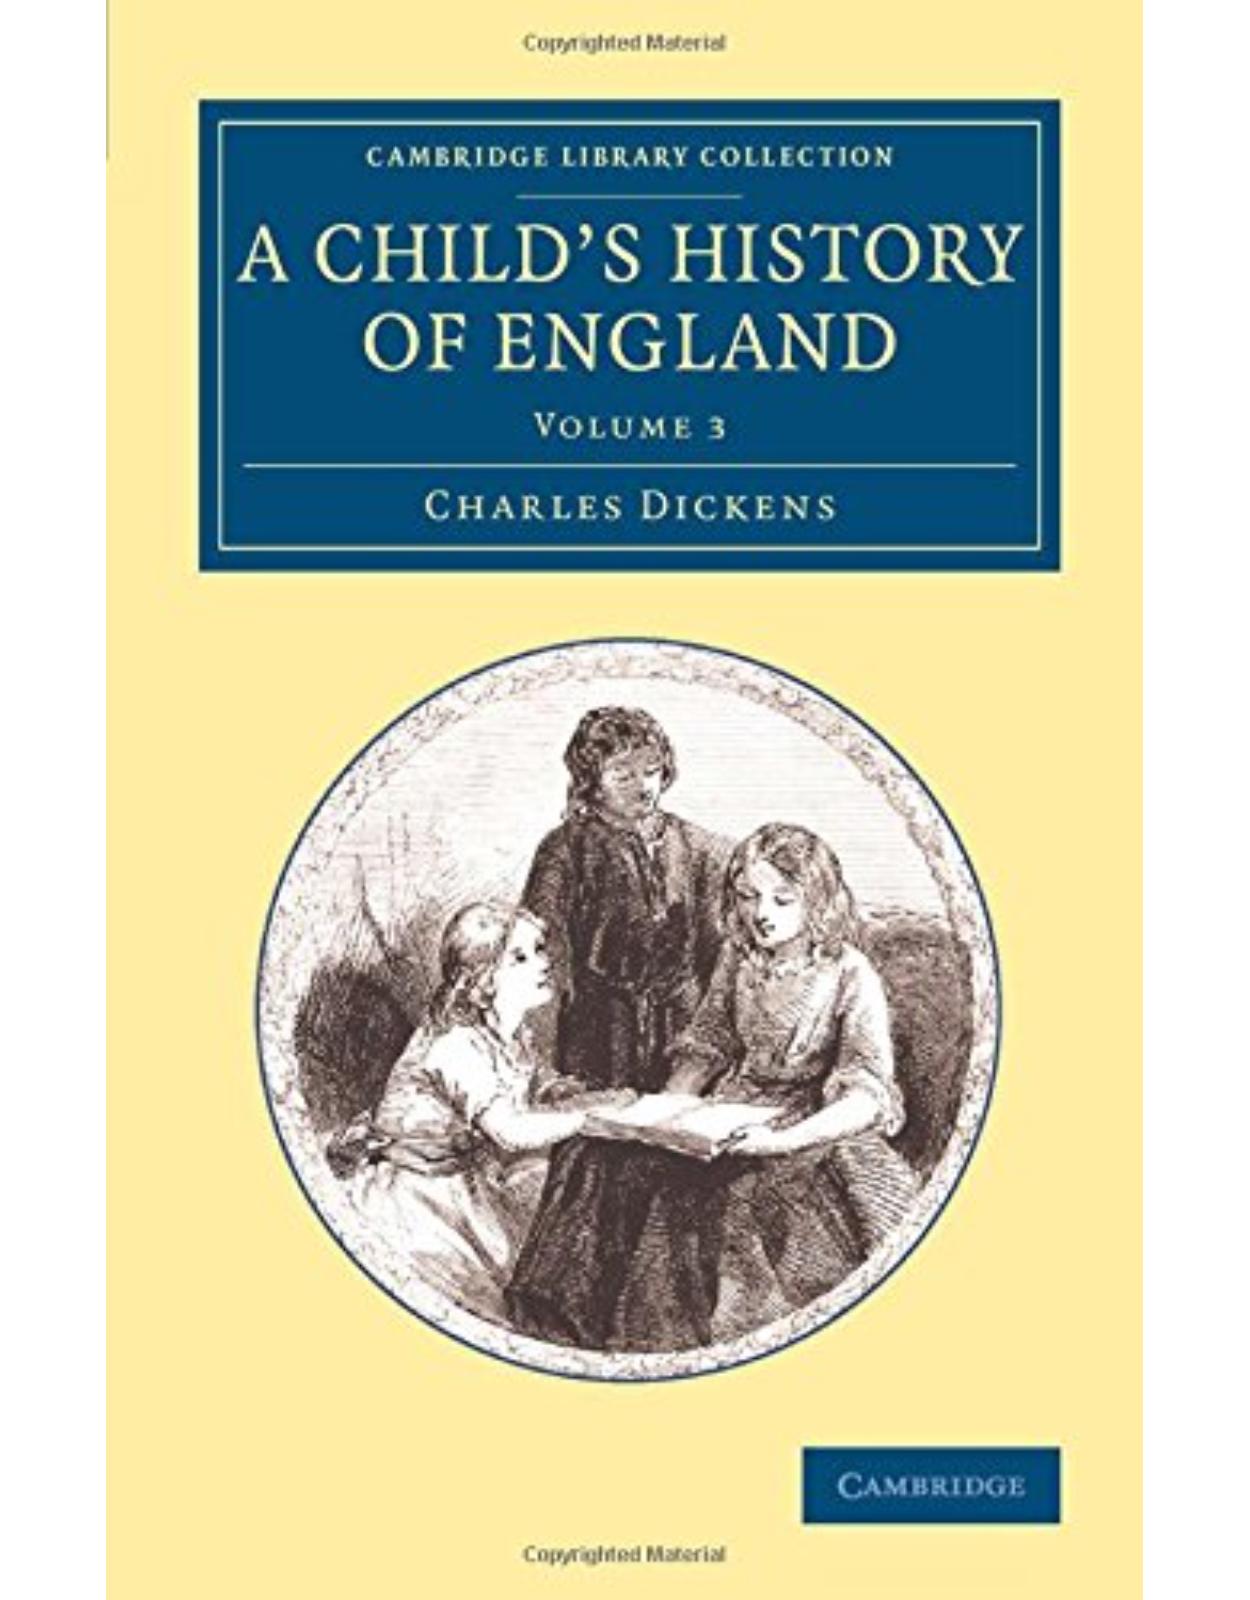 A Child's History of England: Volume 3 (Cambridge Library Collection - Education)